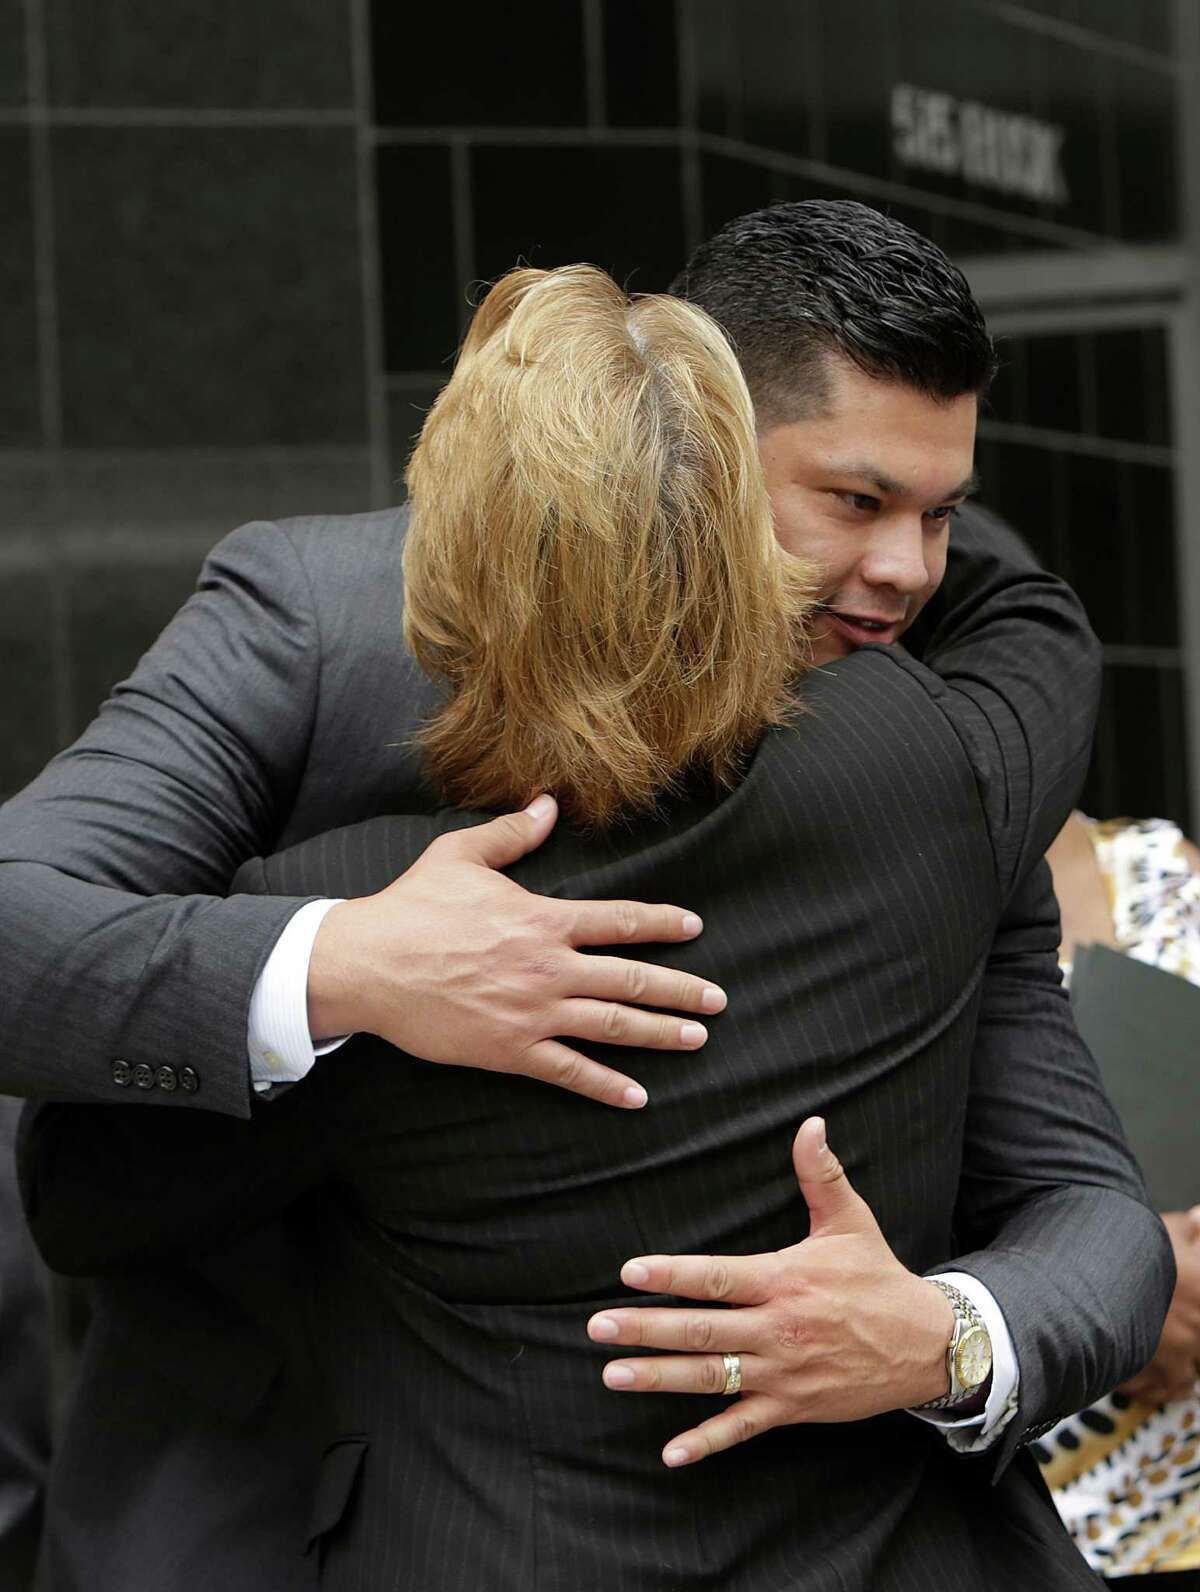 Attorney Kim Ogg hugs Christopher M. Zamora after announcing his legal victory on Tuesday.